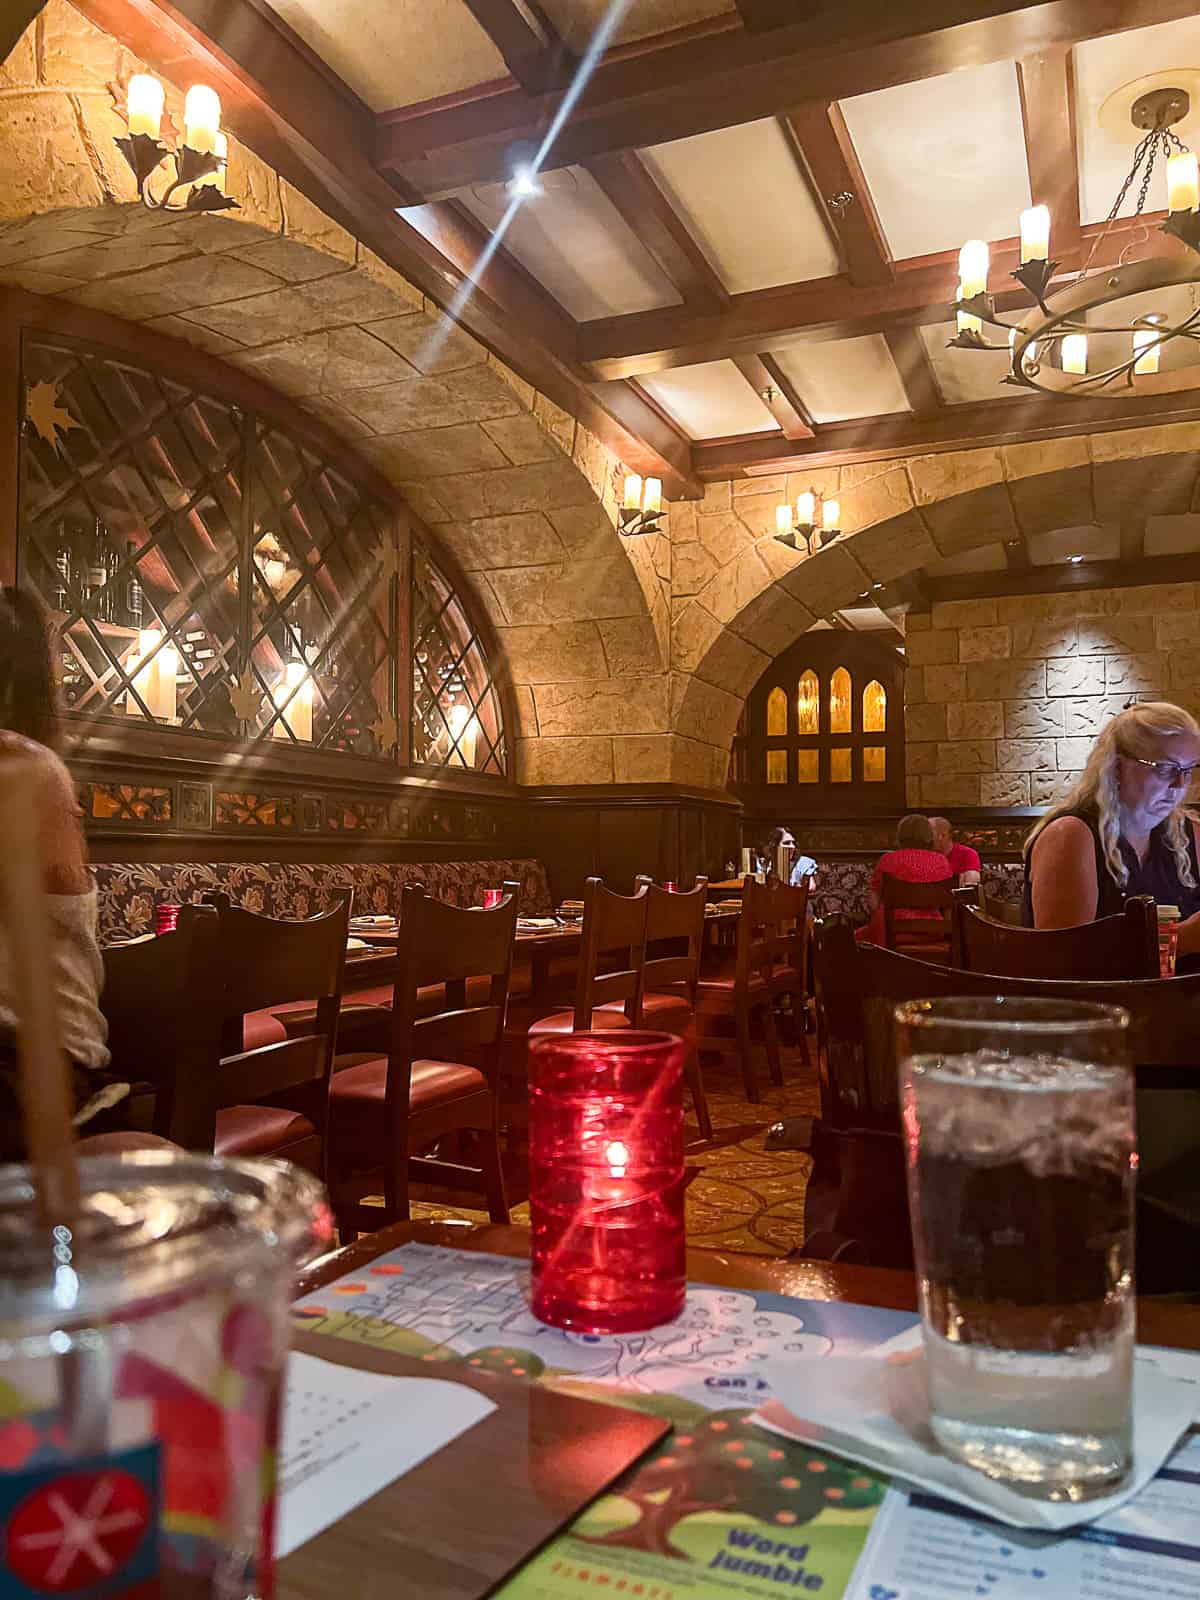 Inside Dining Room Photos at Le Cellier Restaurant in Canada at Epcot